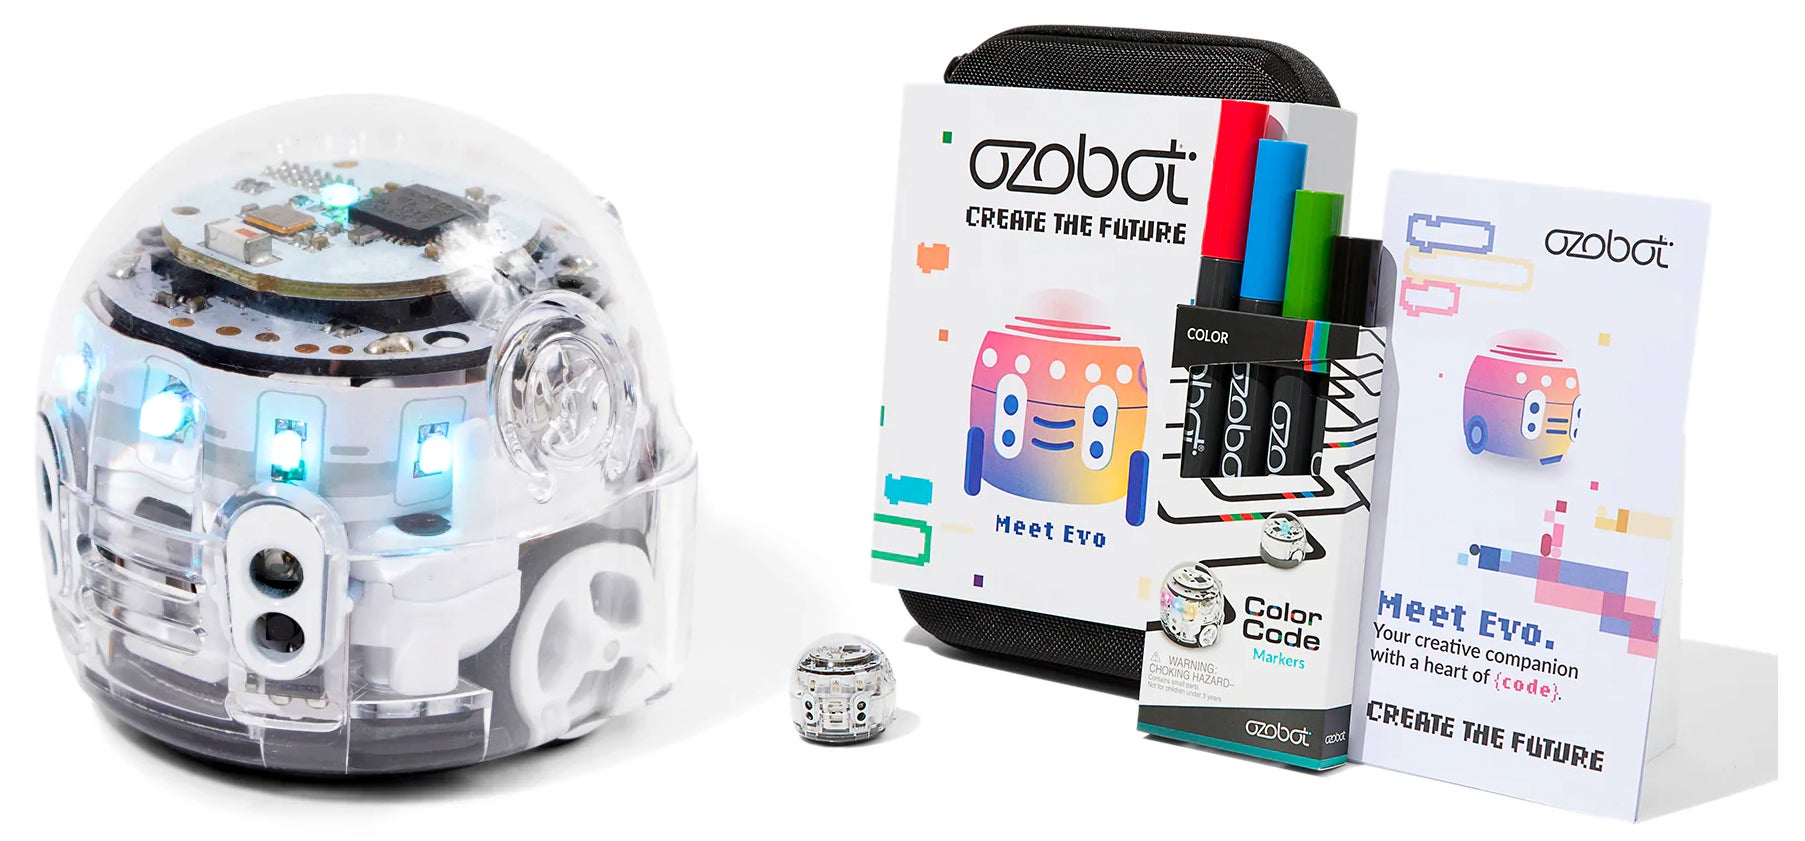 The Best Robotic STEM Toys to Fill The LEGO Mindstorms Hole in Your Heart